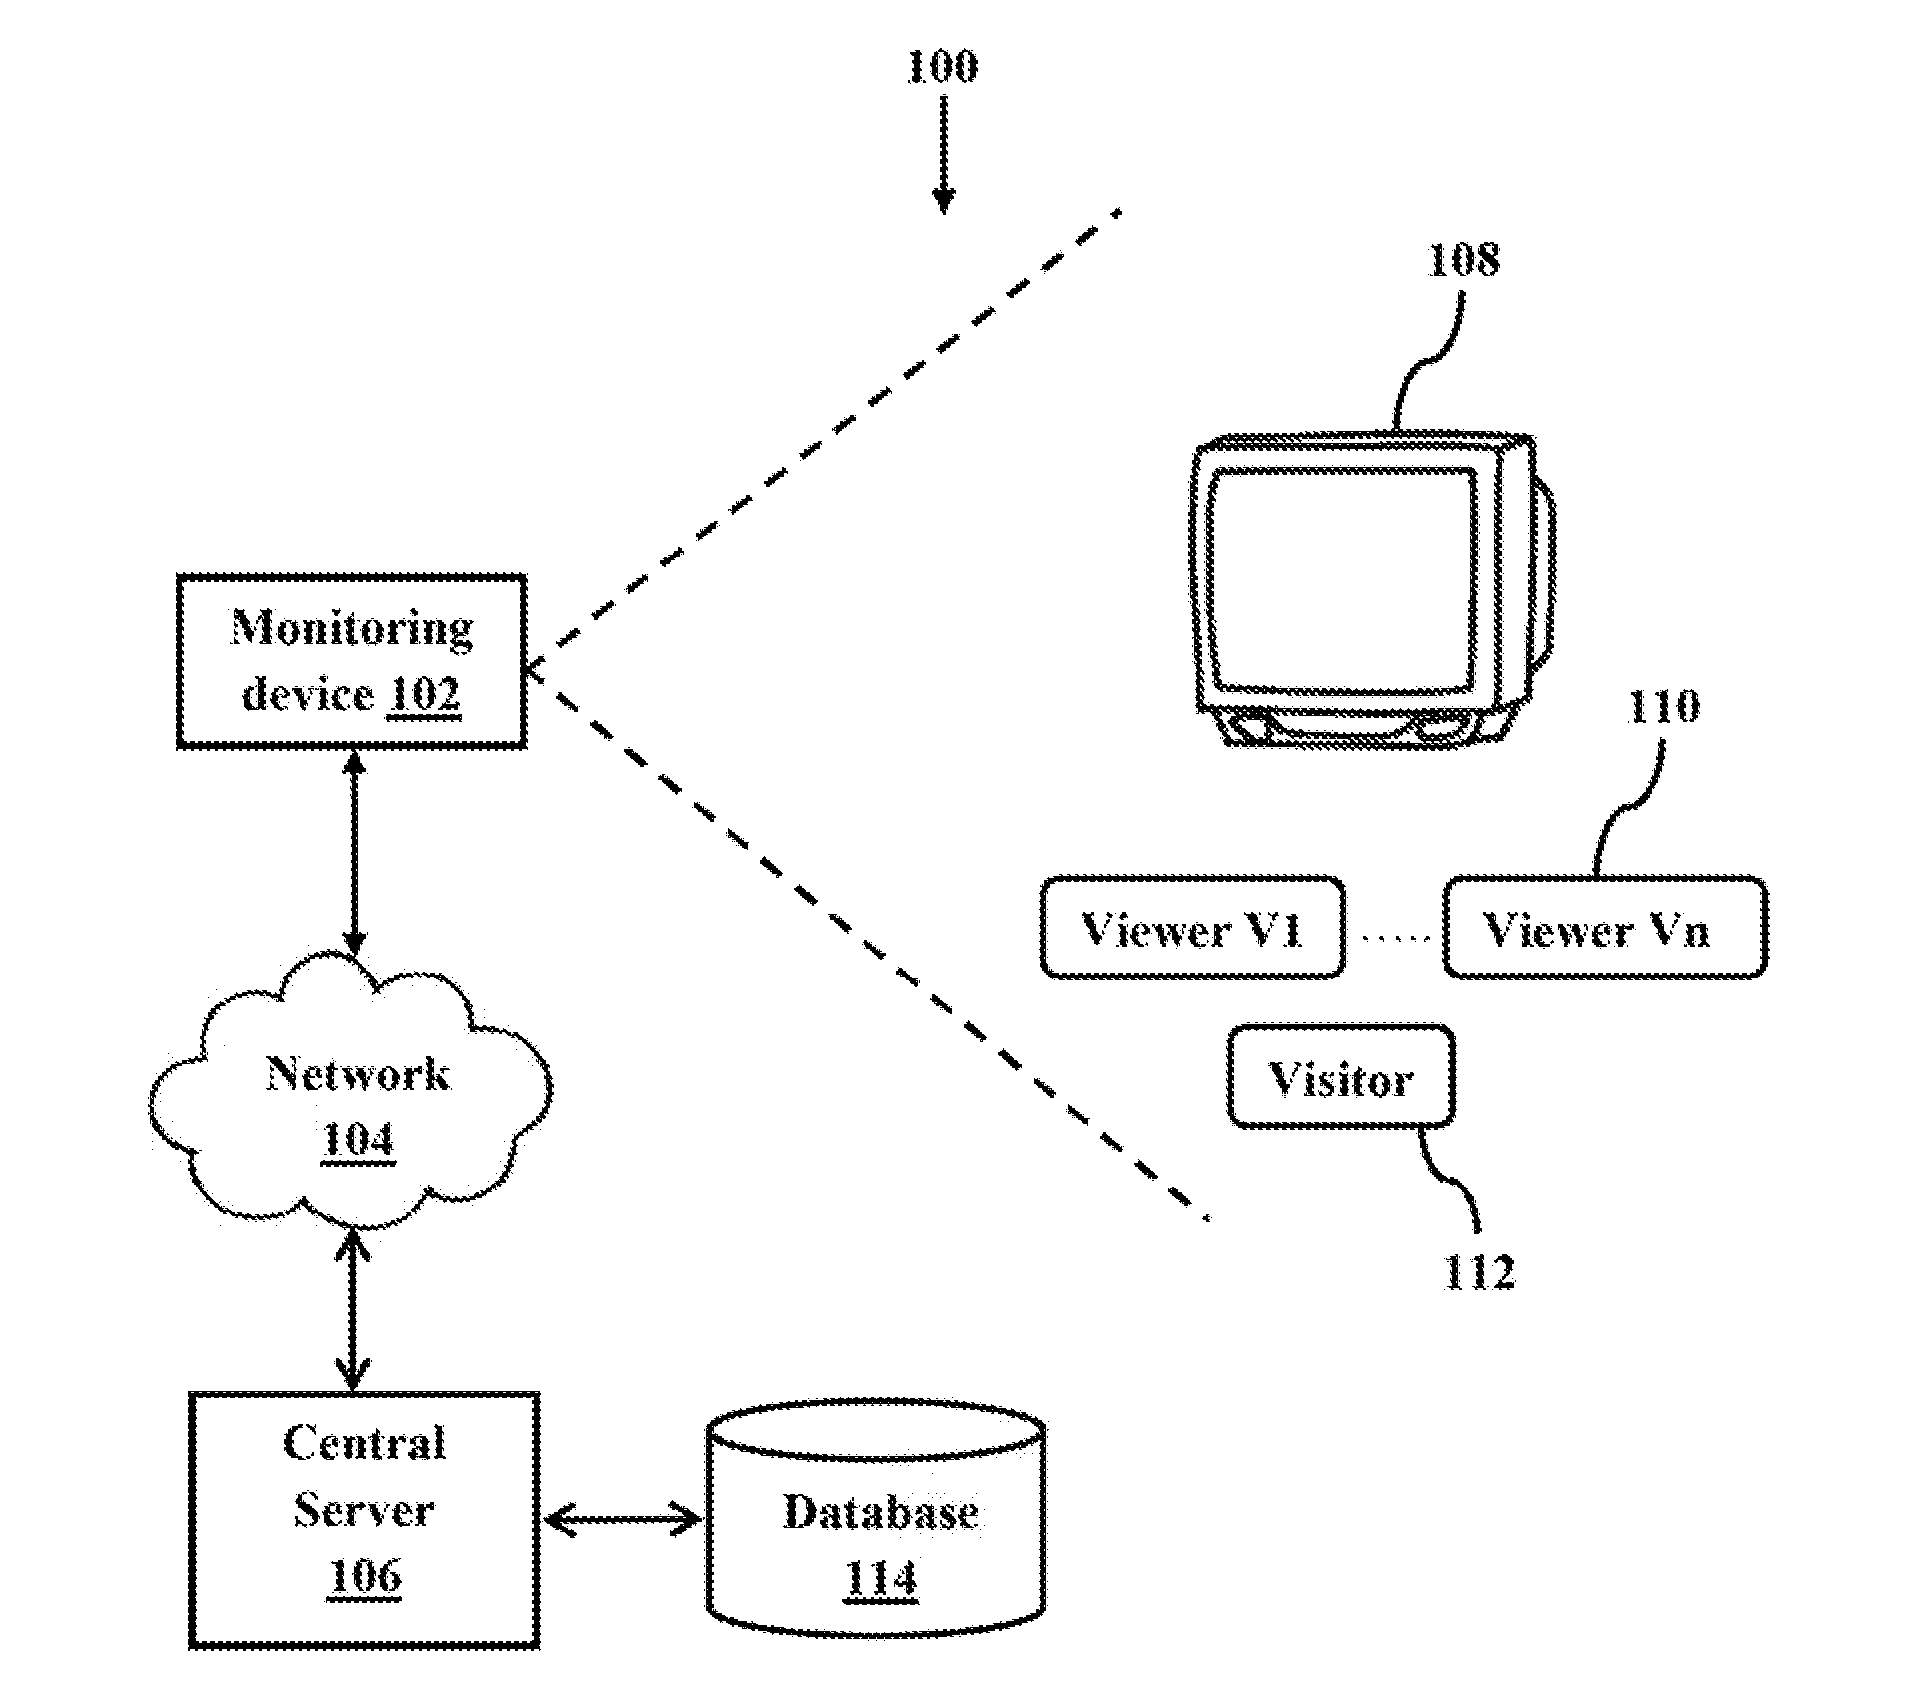 System and method for automatic content recognition and audience measurement for television channels and advertisements